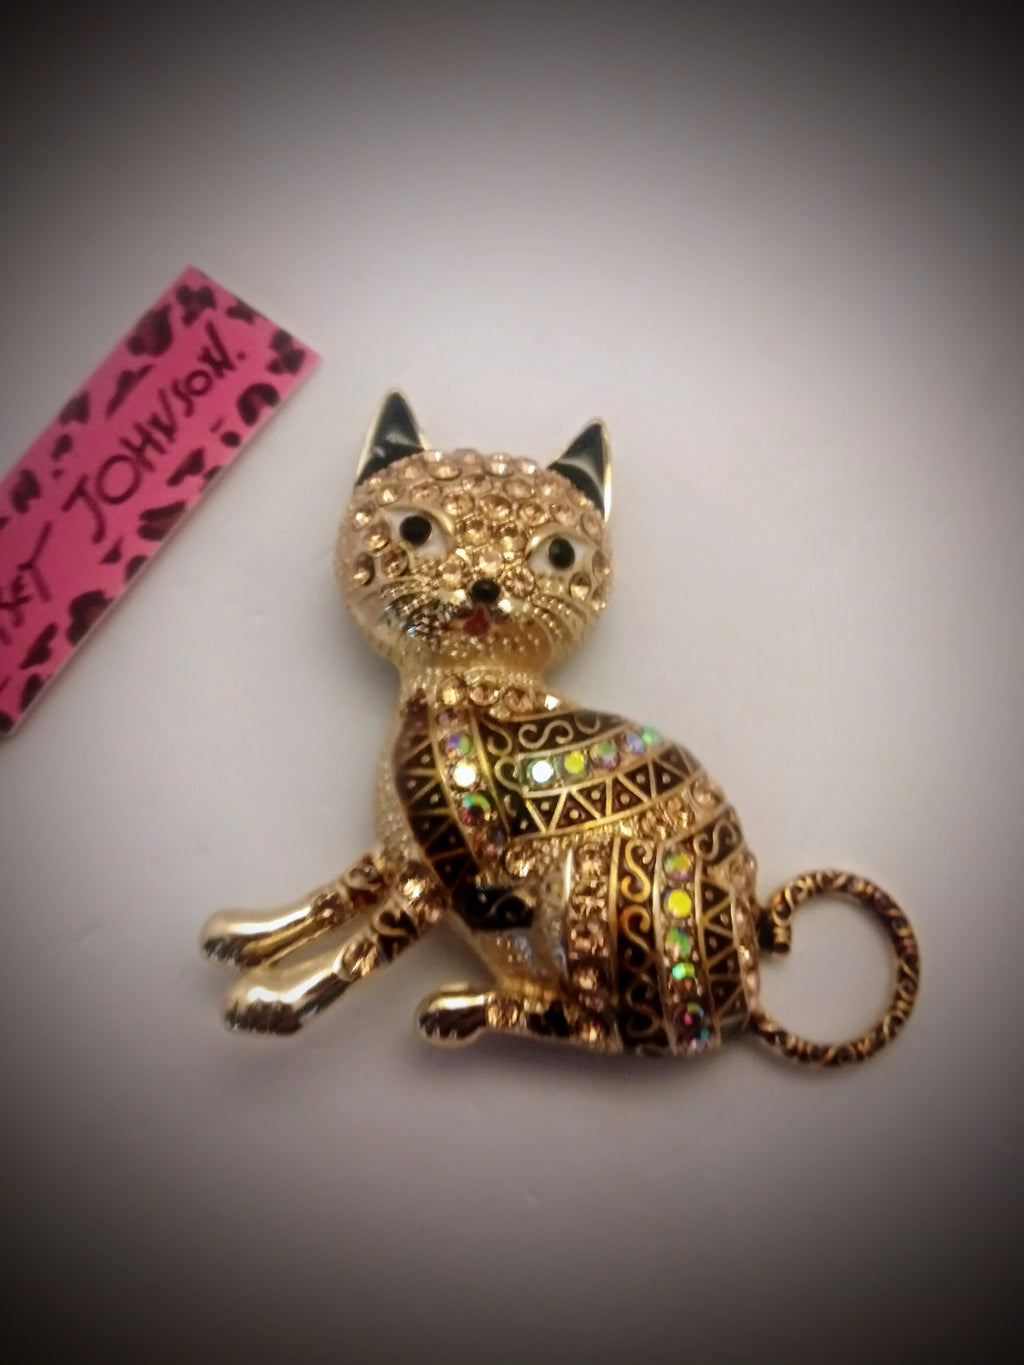 BETSEY
JOHNSON BEAUTIFUL BROWN, SILVER, AND RAINBOW CAT PENDANT/BROACH